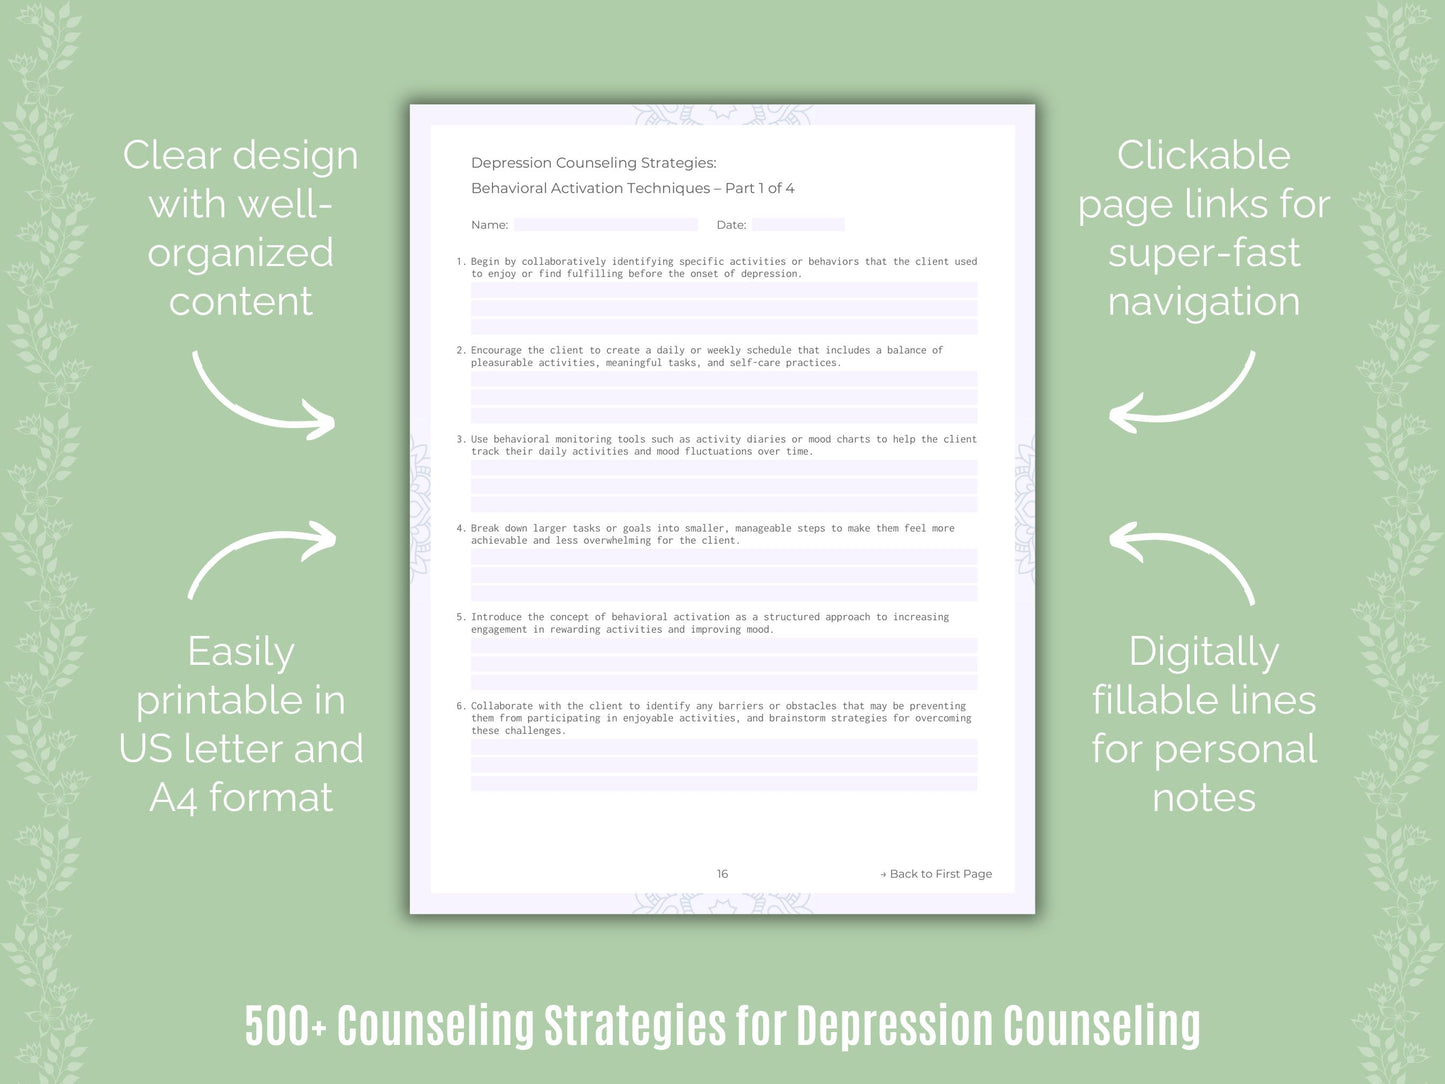 Depression Counseling Resource